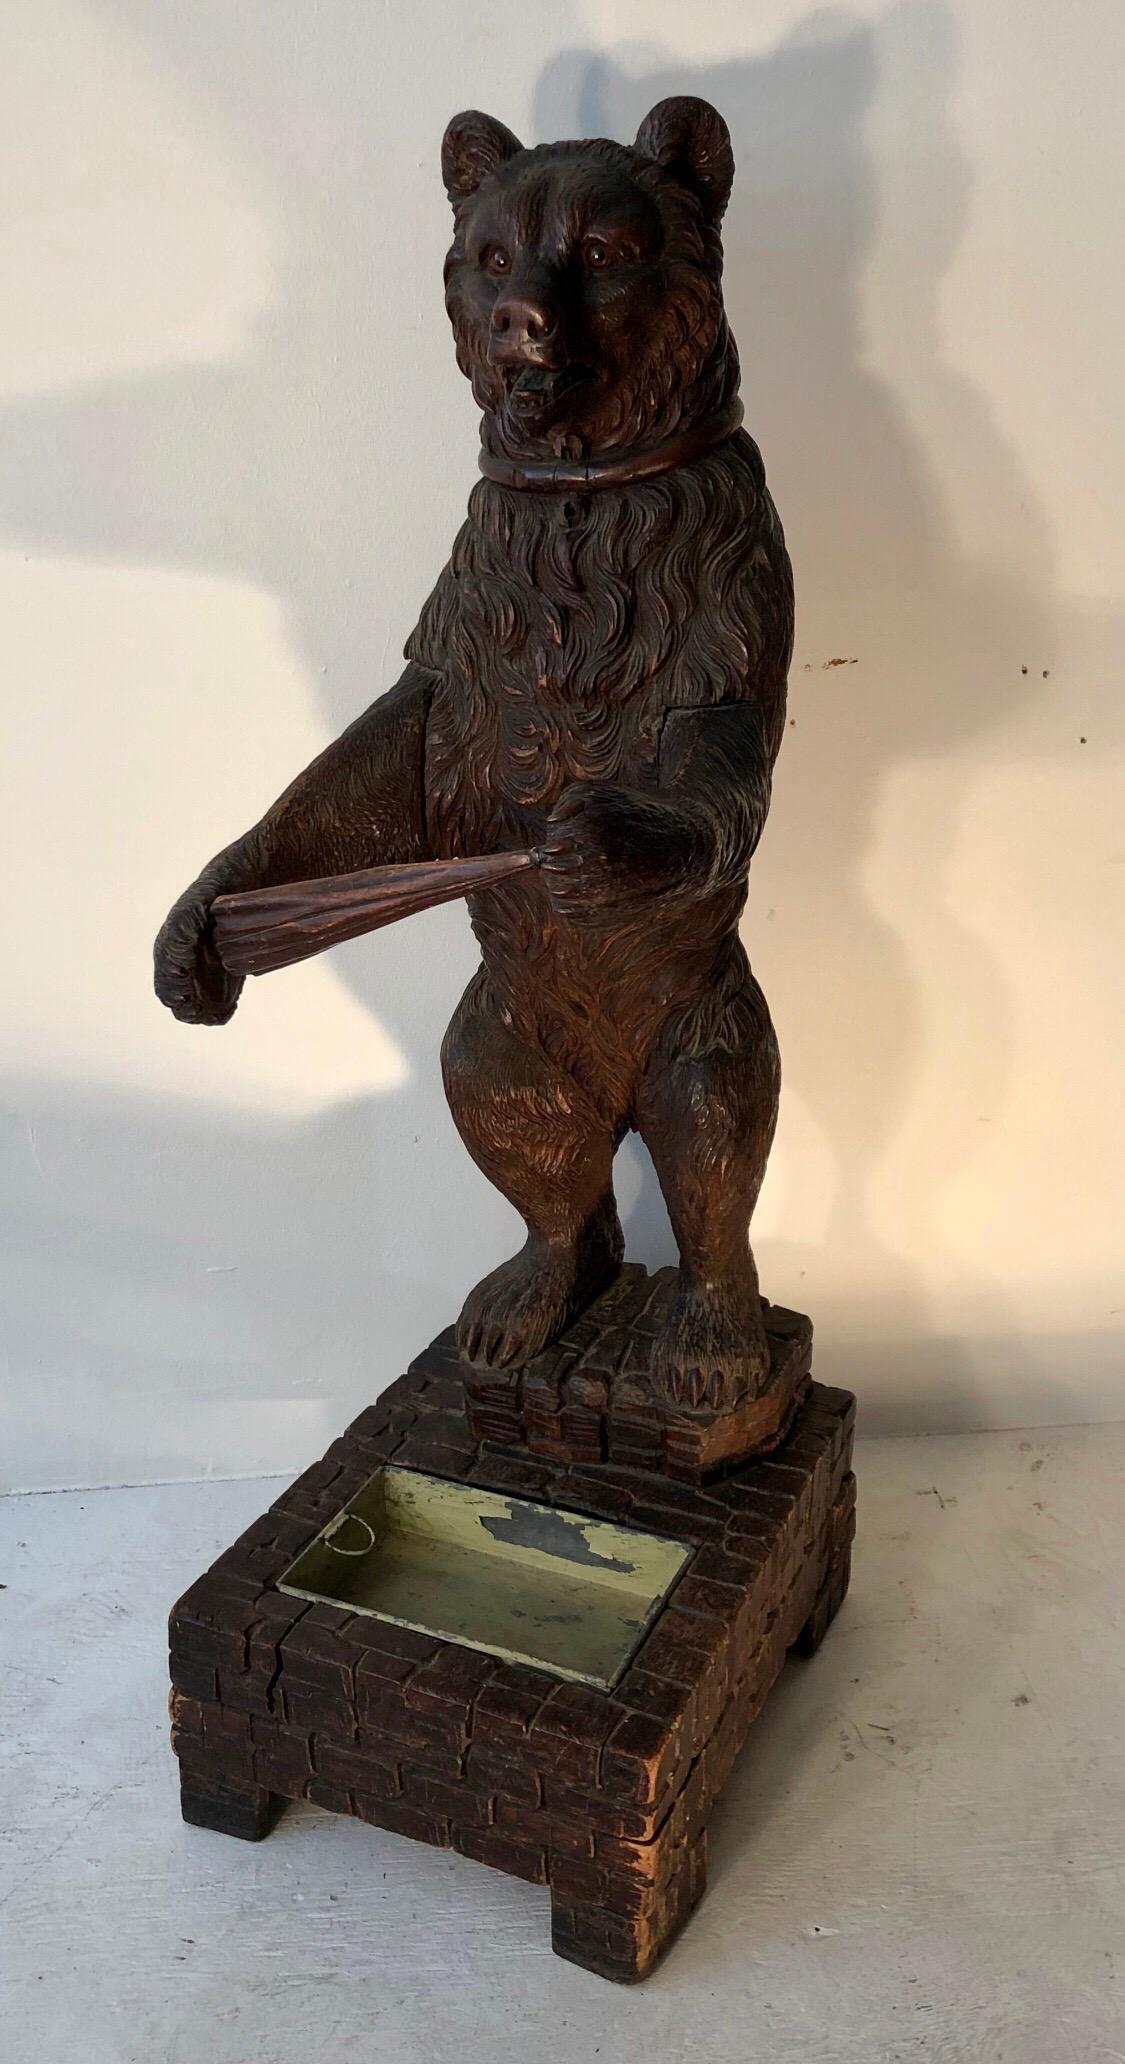 This exquisite carved Black Forest bear cane / umbrella stand with glass eyes and is holding a carved umbrella to hold the walking sticks. The Bear is standing on a faux stone plinth carved out of wood with its original drip tray.